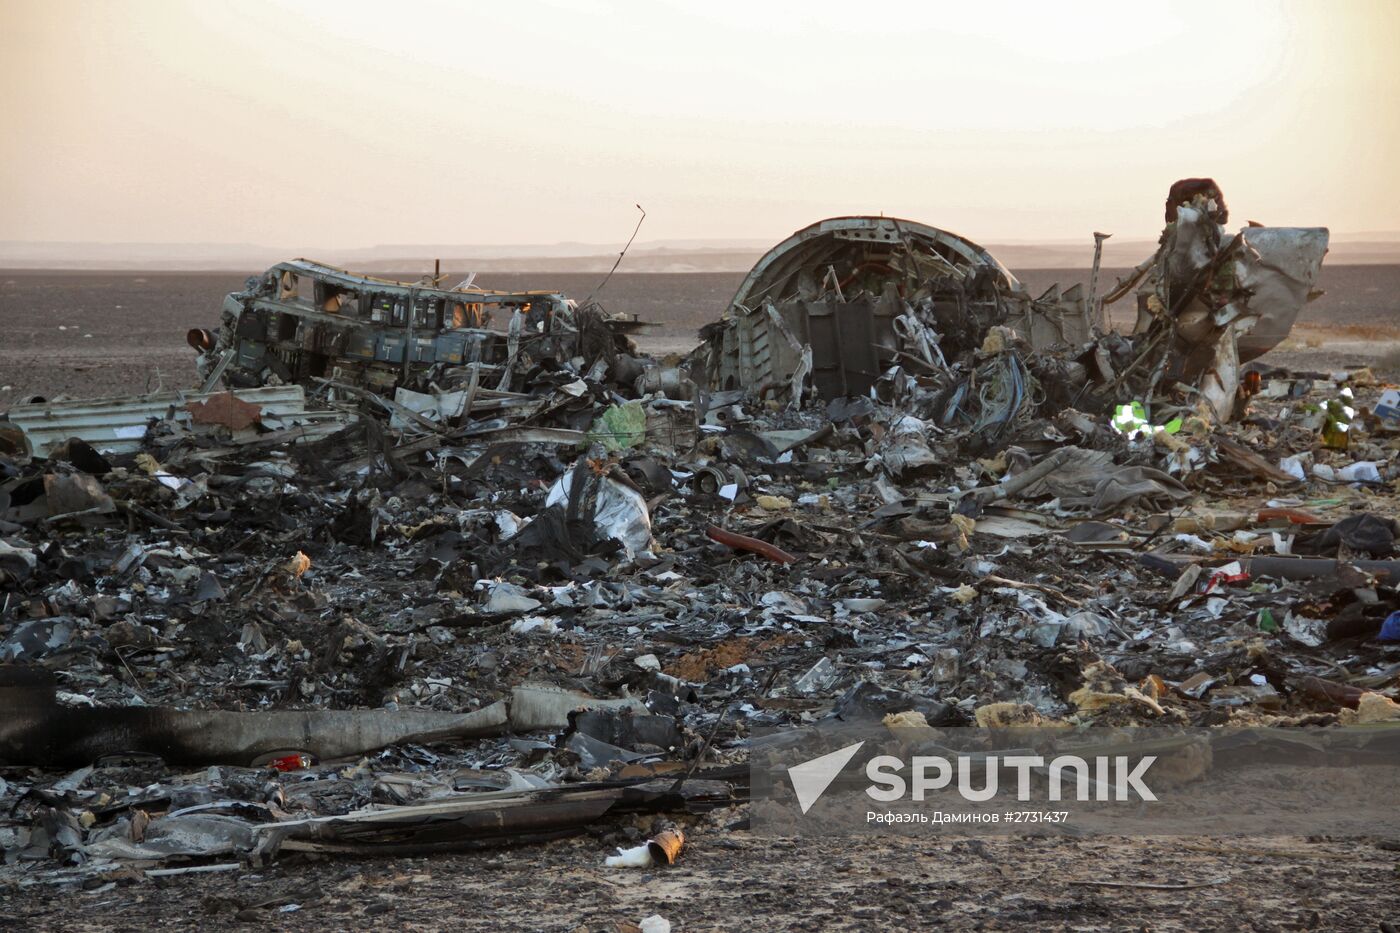 Search operations at Airbus A321 crash site in Egypt